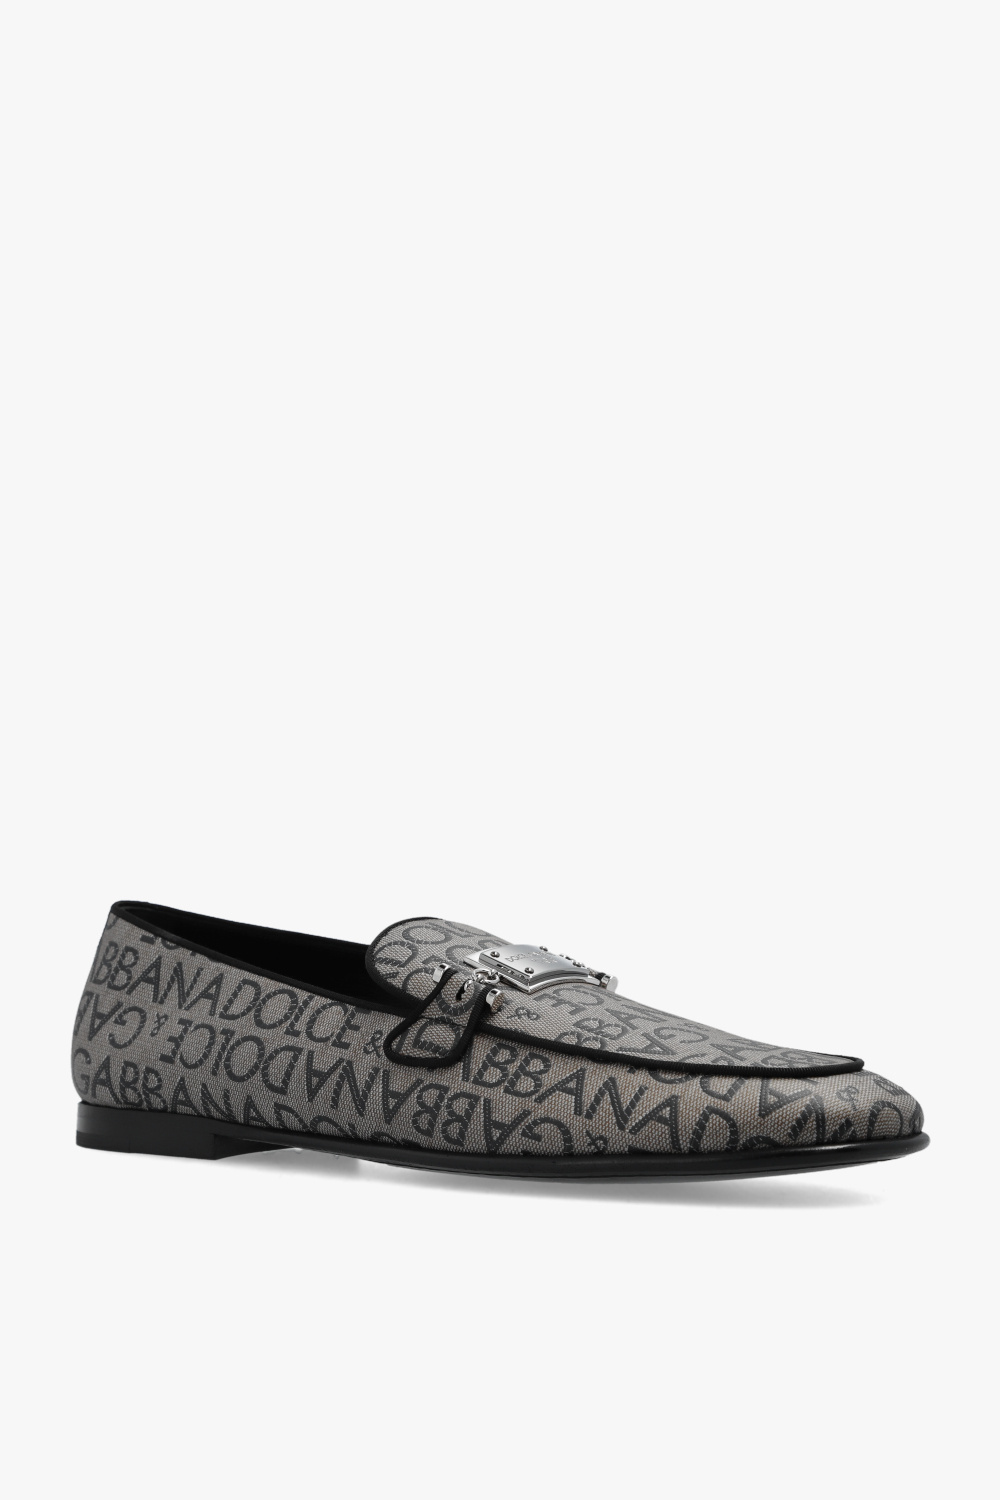 Dolce & Gabbana Kids tiered brocade dress Loafers with monogram